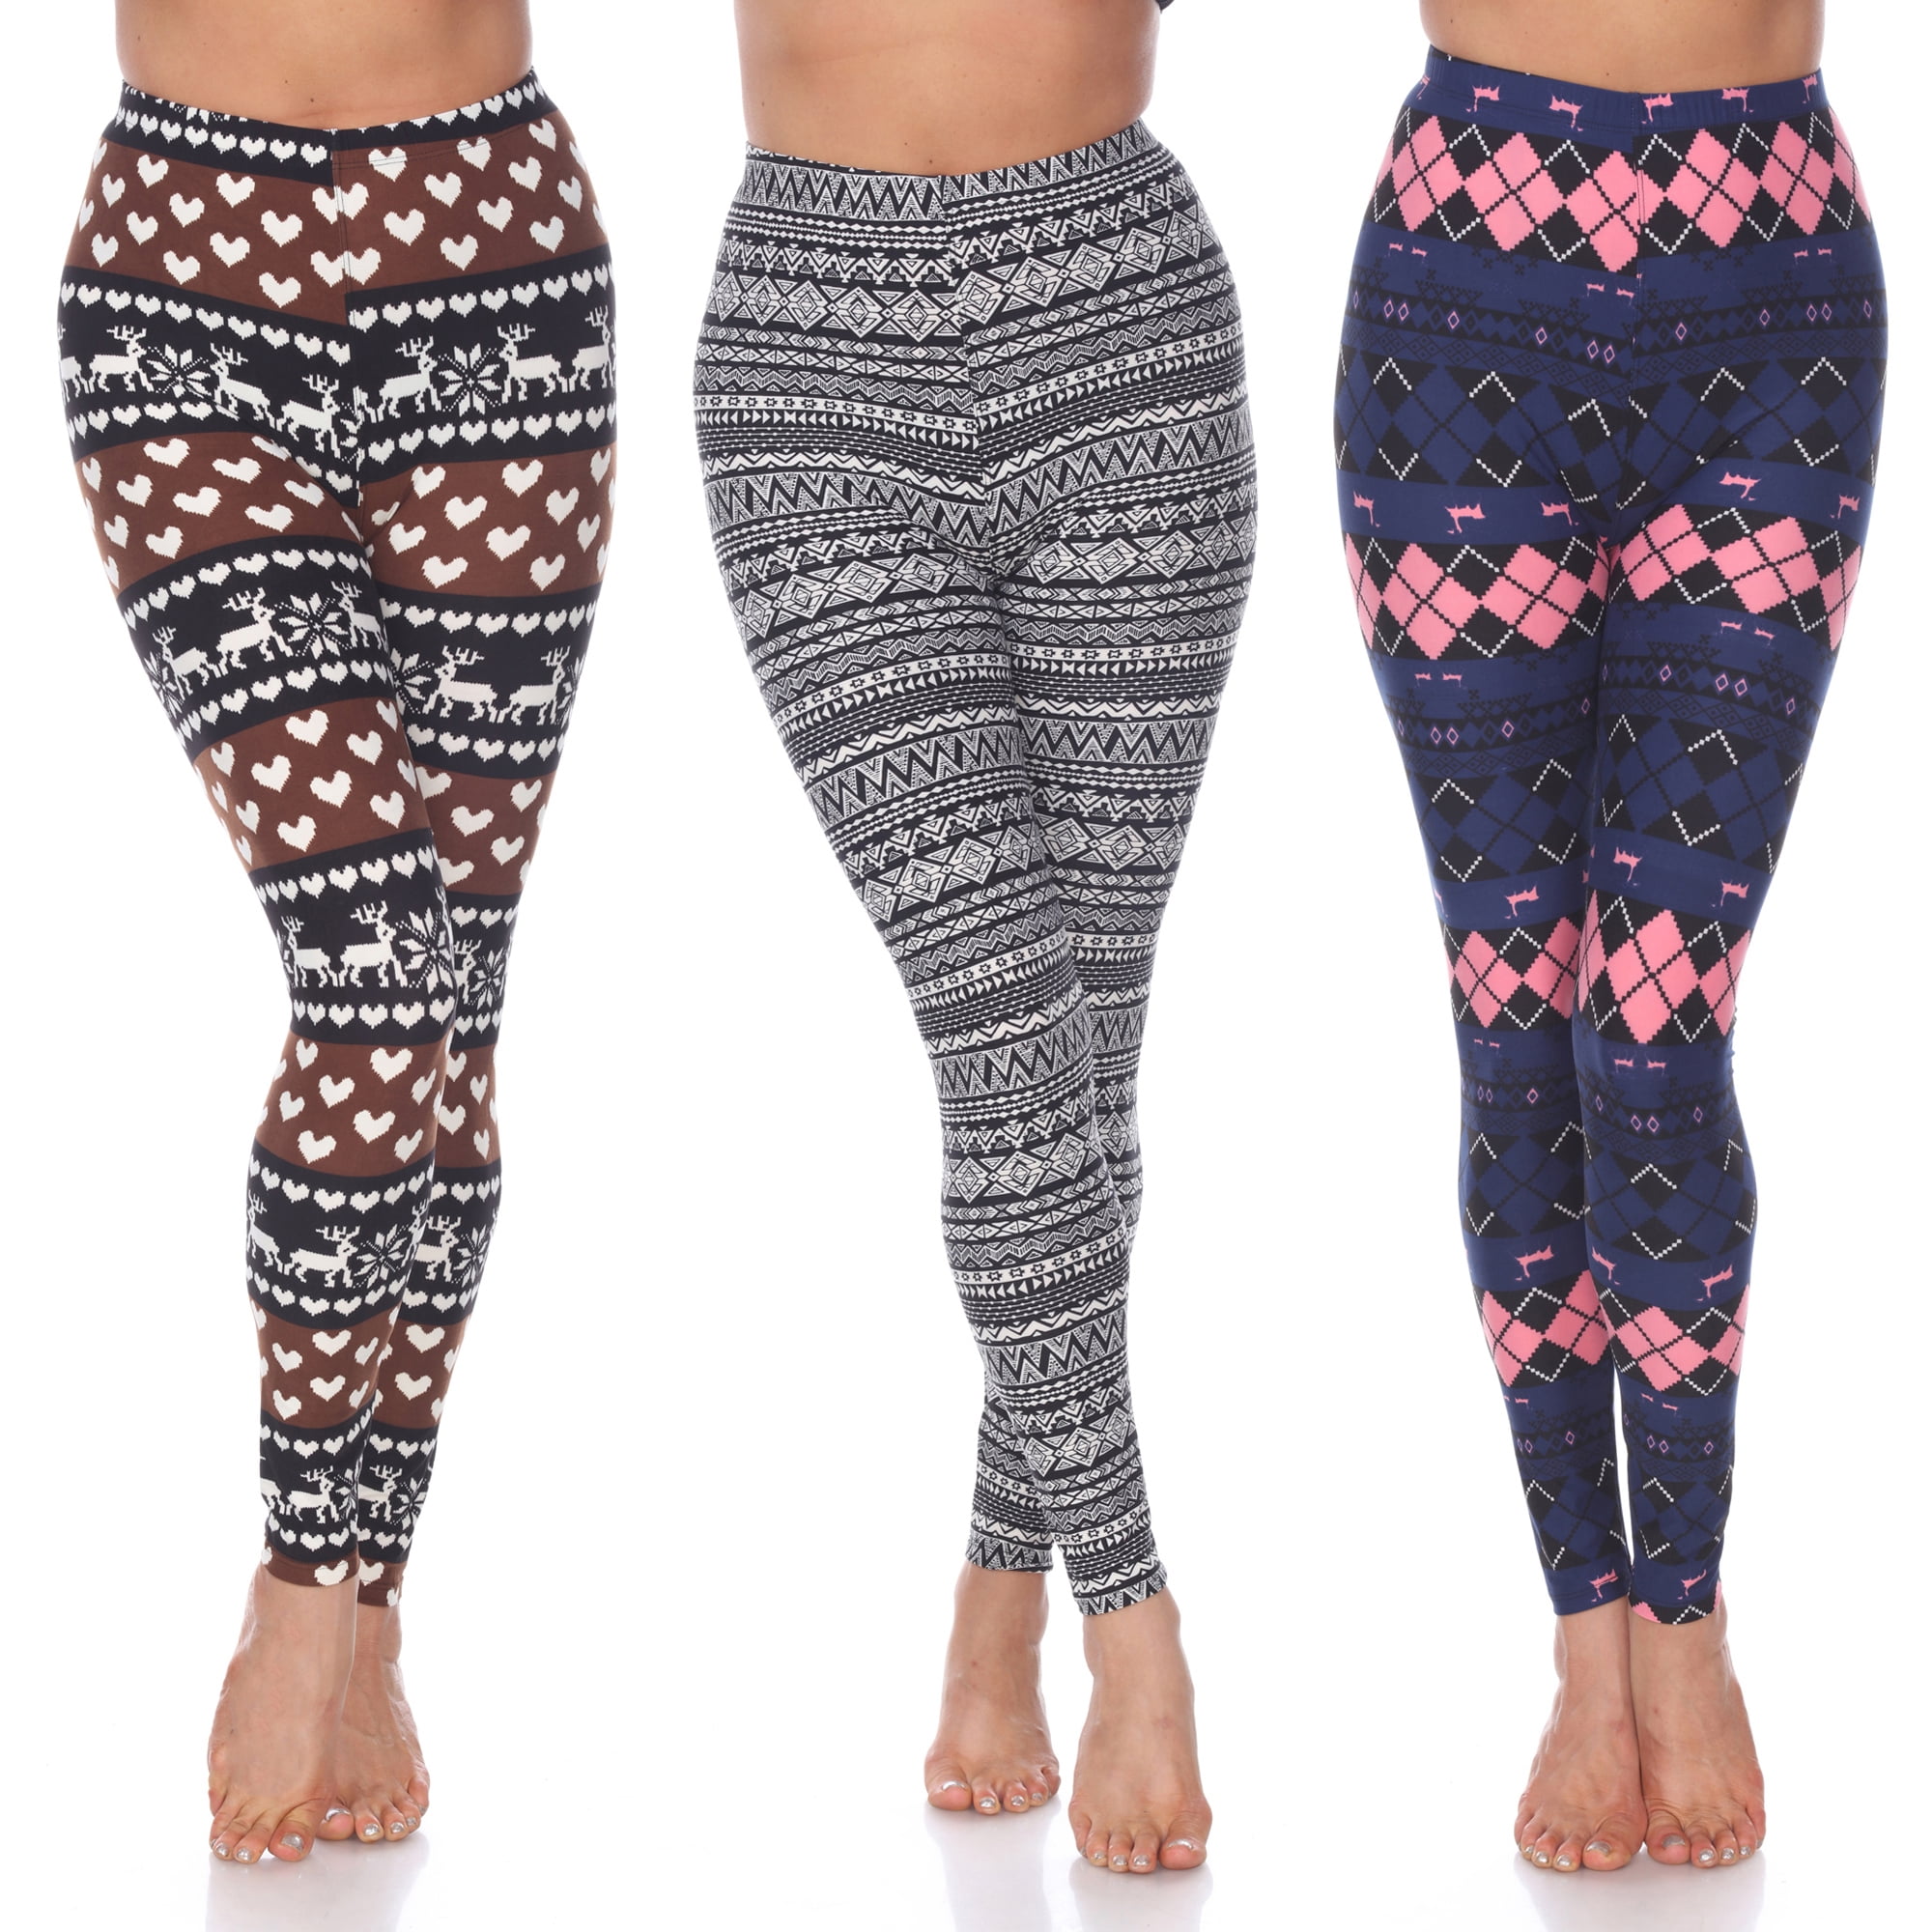 Ladies Printed Leggings Suppliers 19158560 - Wholesale Manufacturers and  Exporters